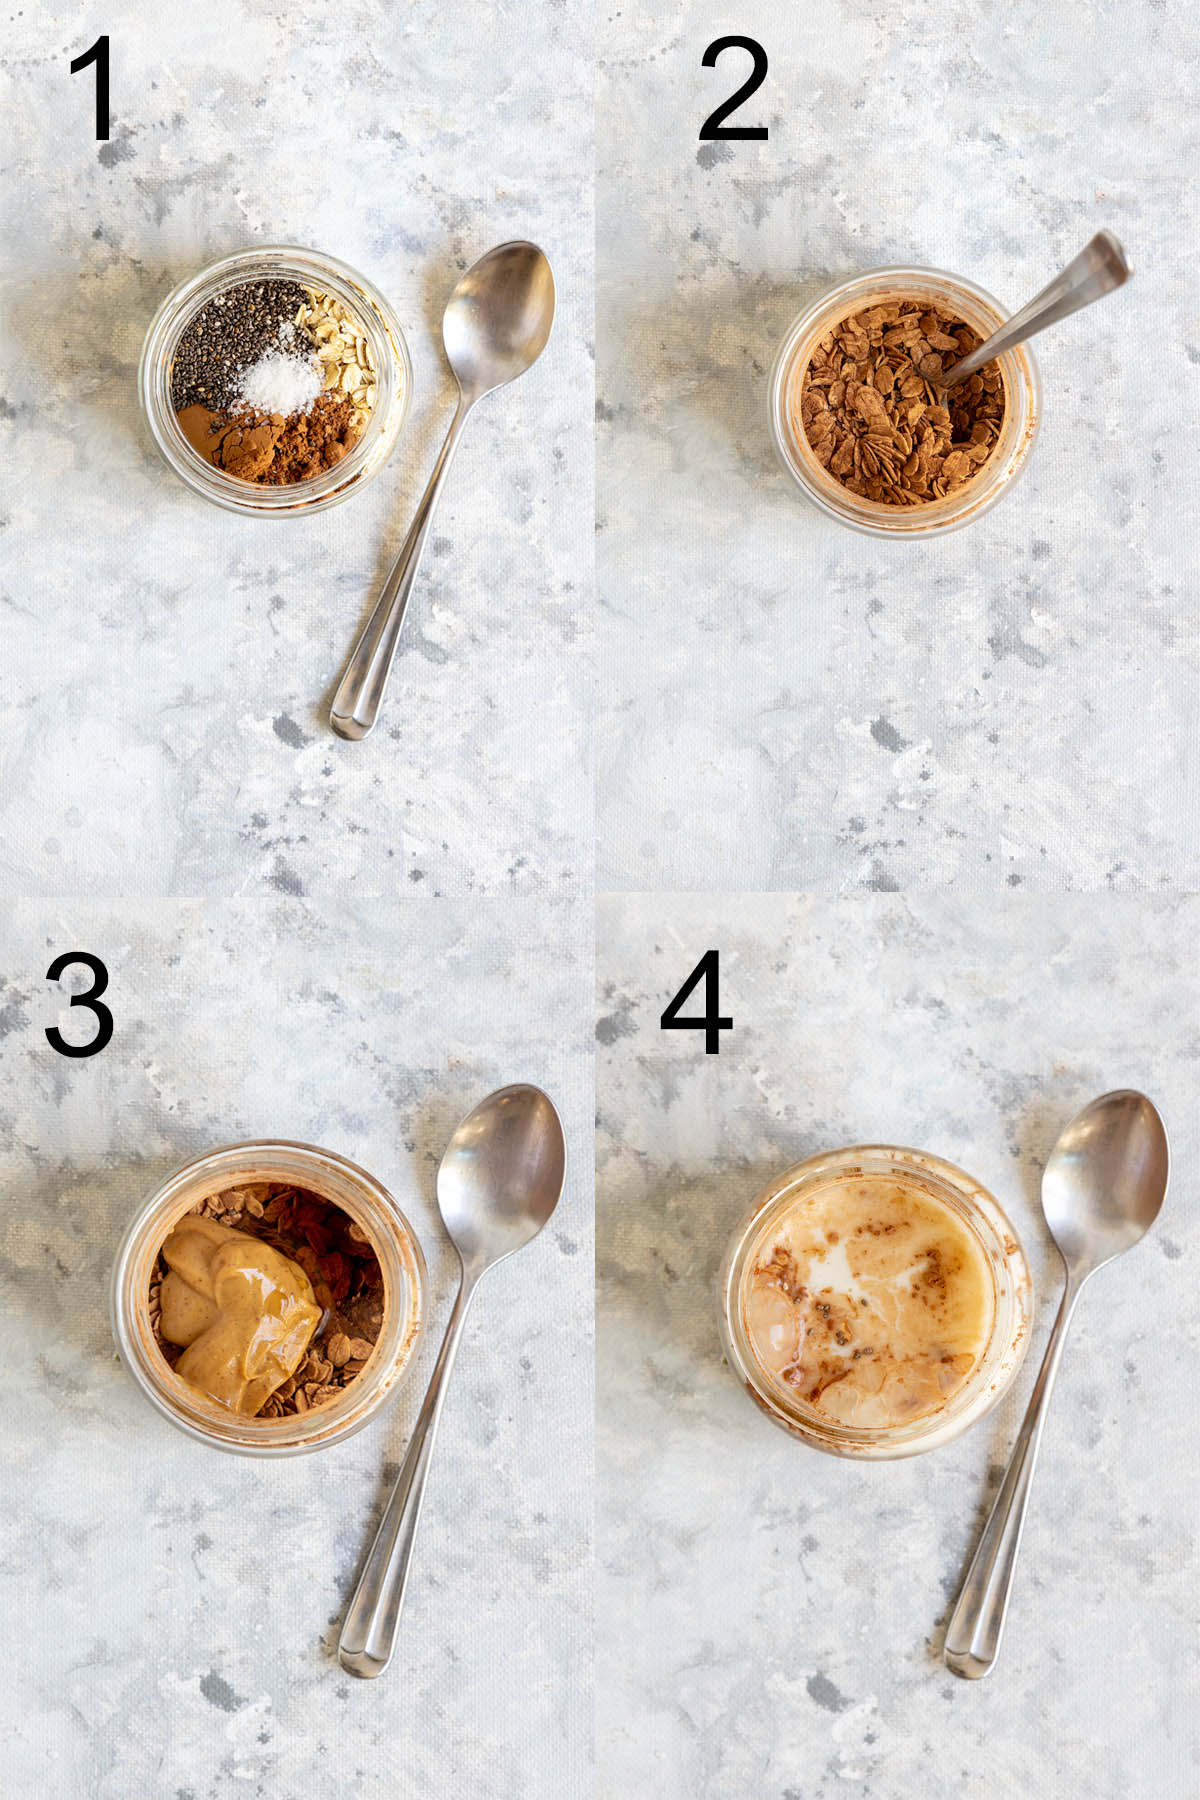 Steps for making overnight oats in order.